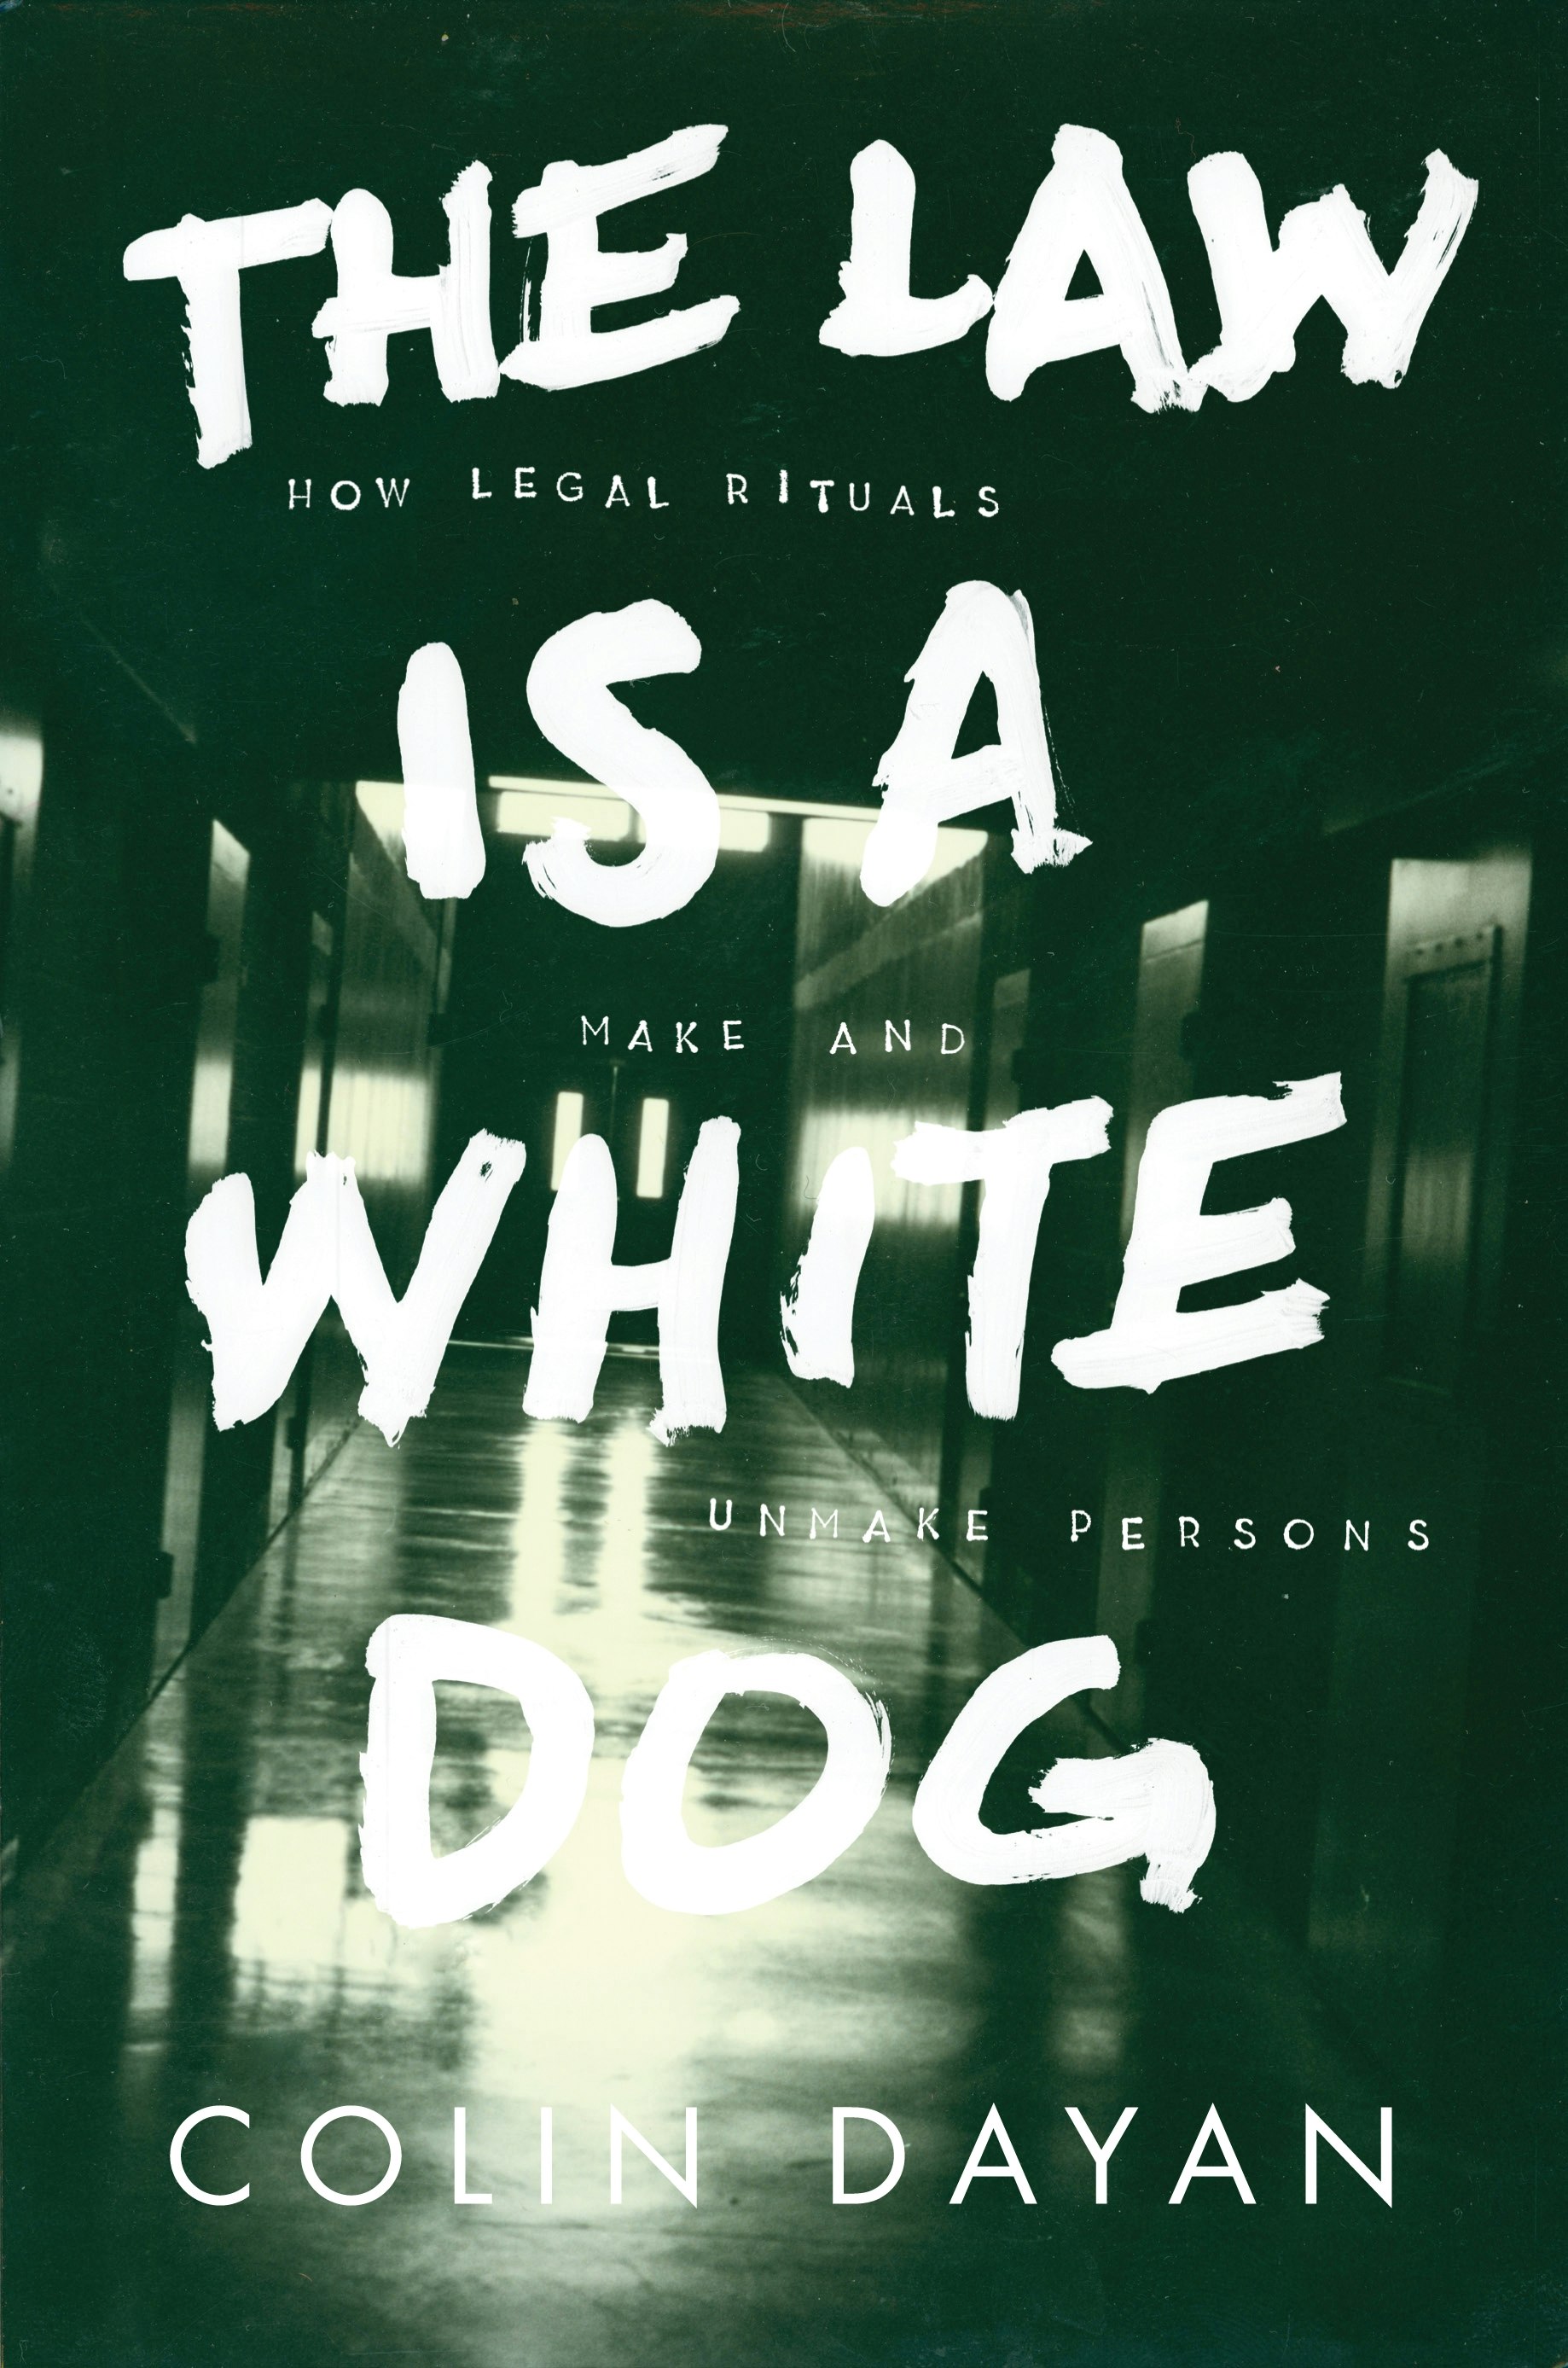 Legal　Unmake　The　a　and　Make　White　Rituals　Dog:　How　Is　Law　Persons